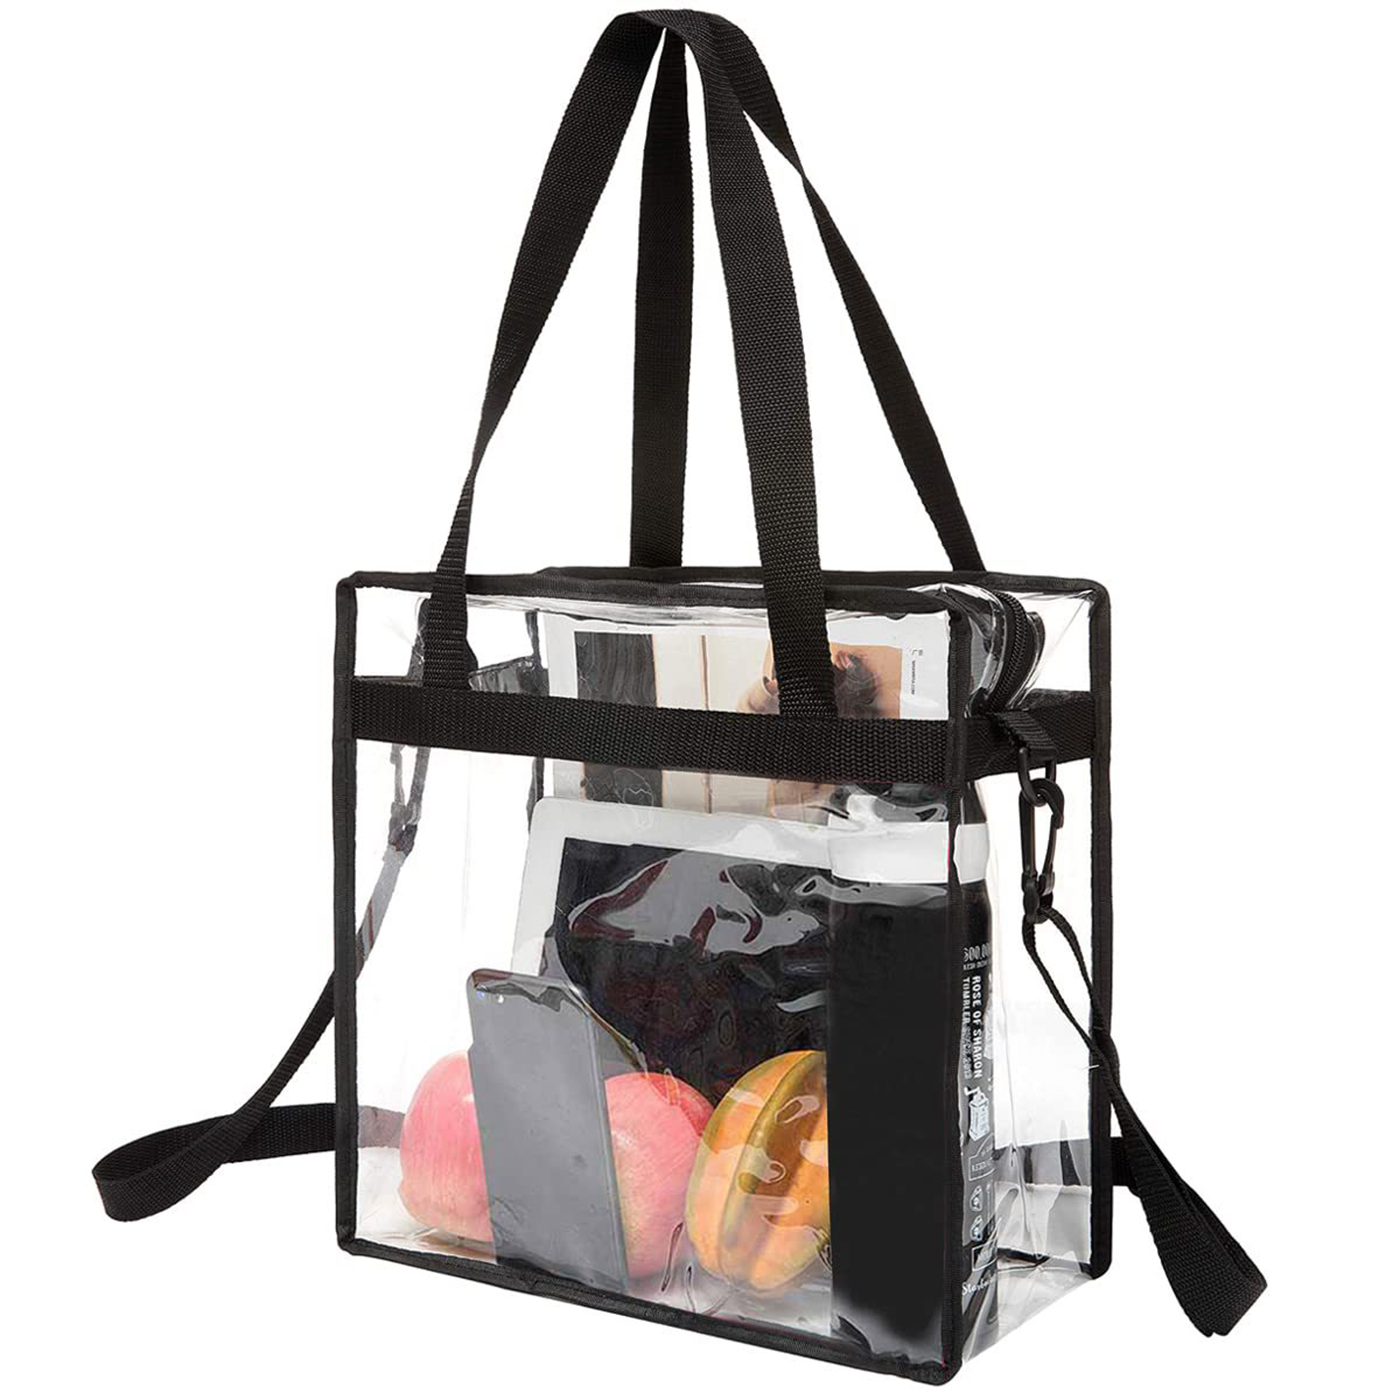 Clear Zippered Tote Bag With Shoulder Strap1